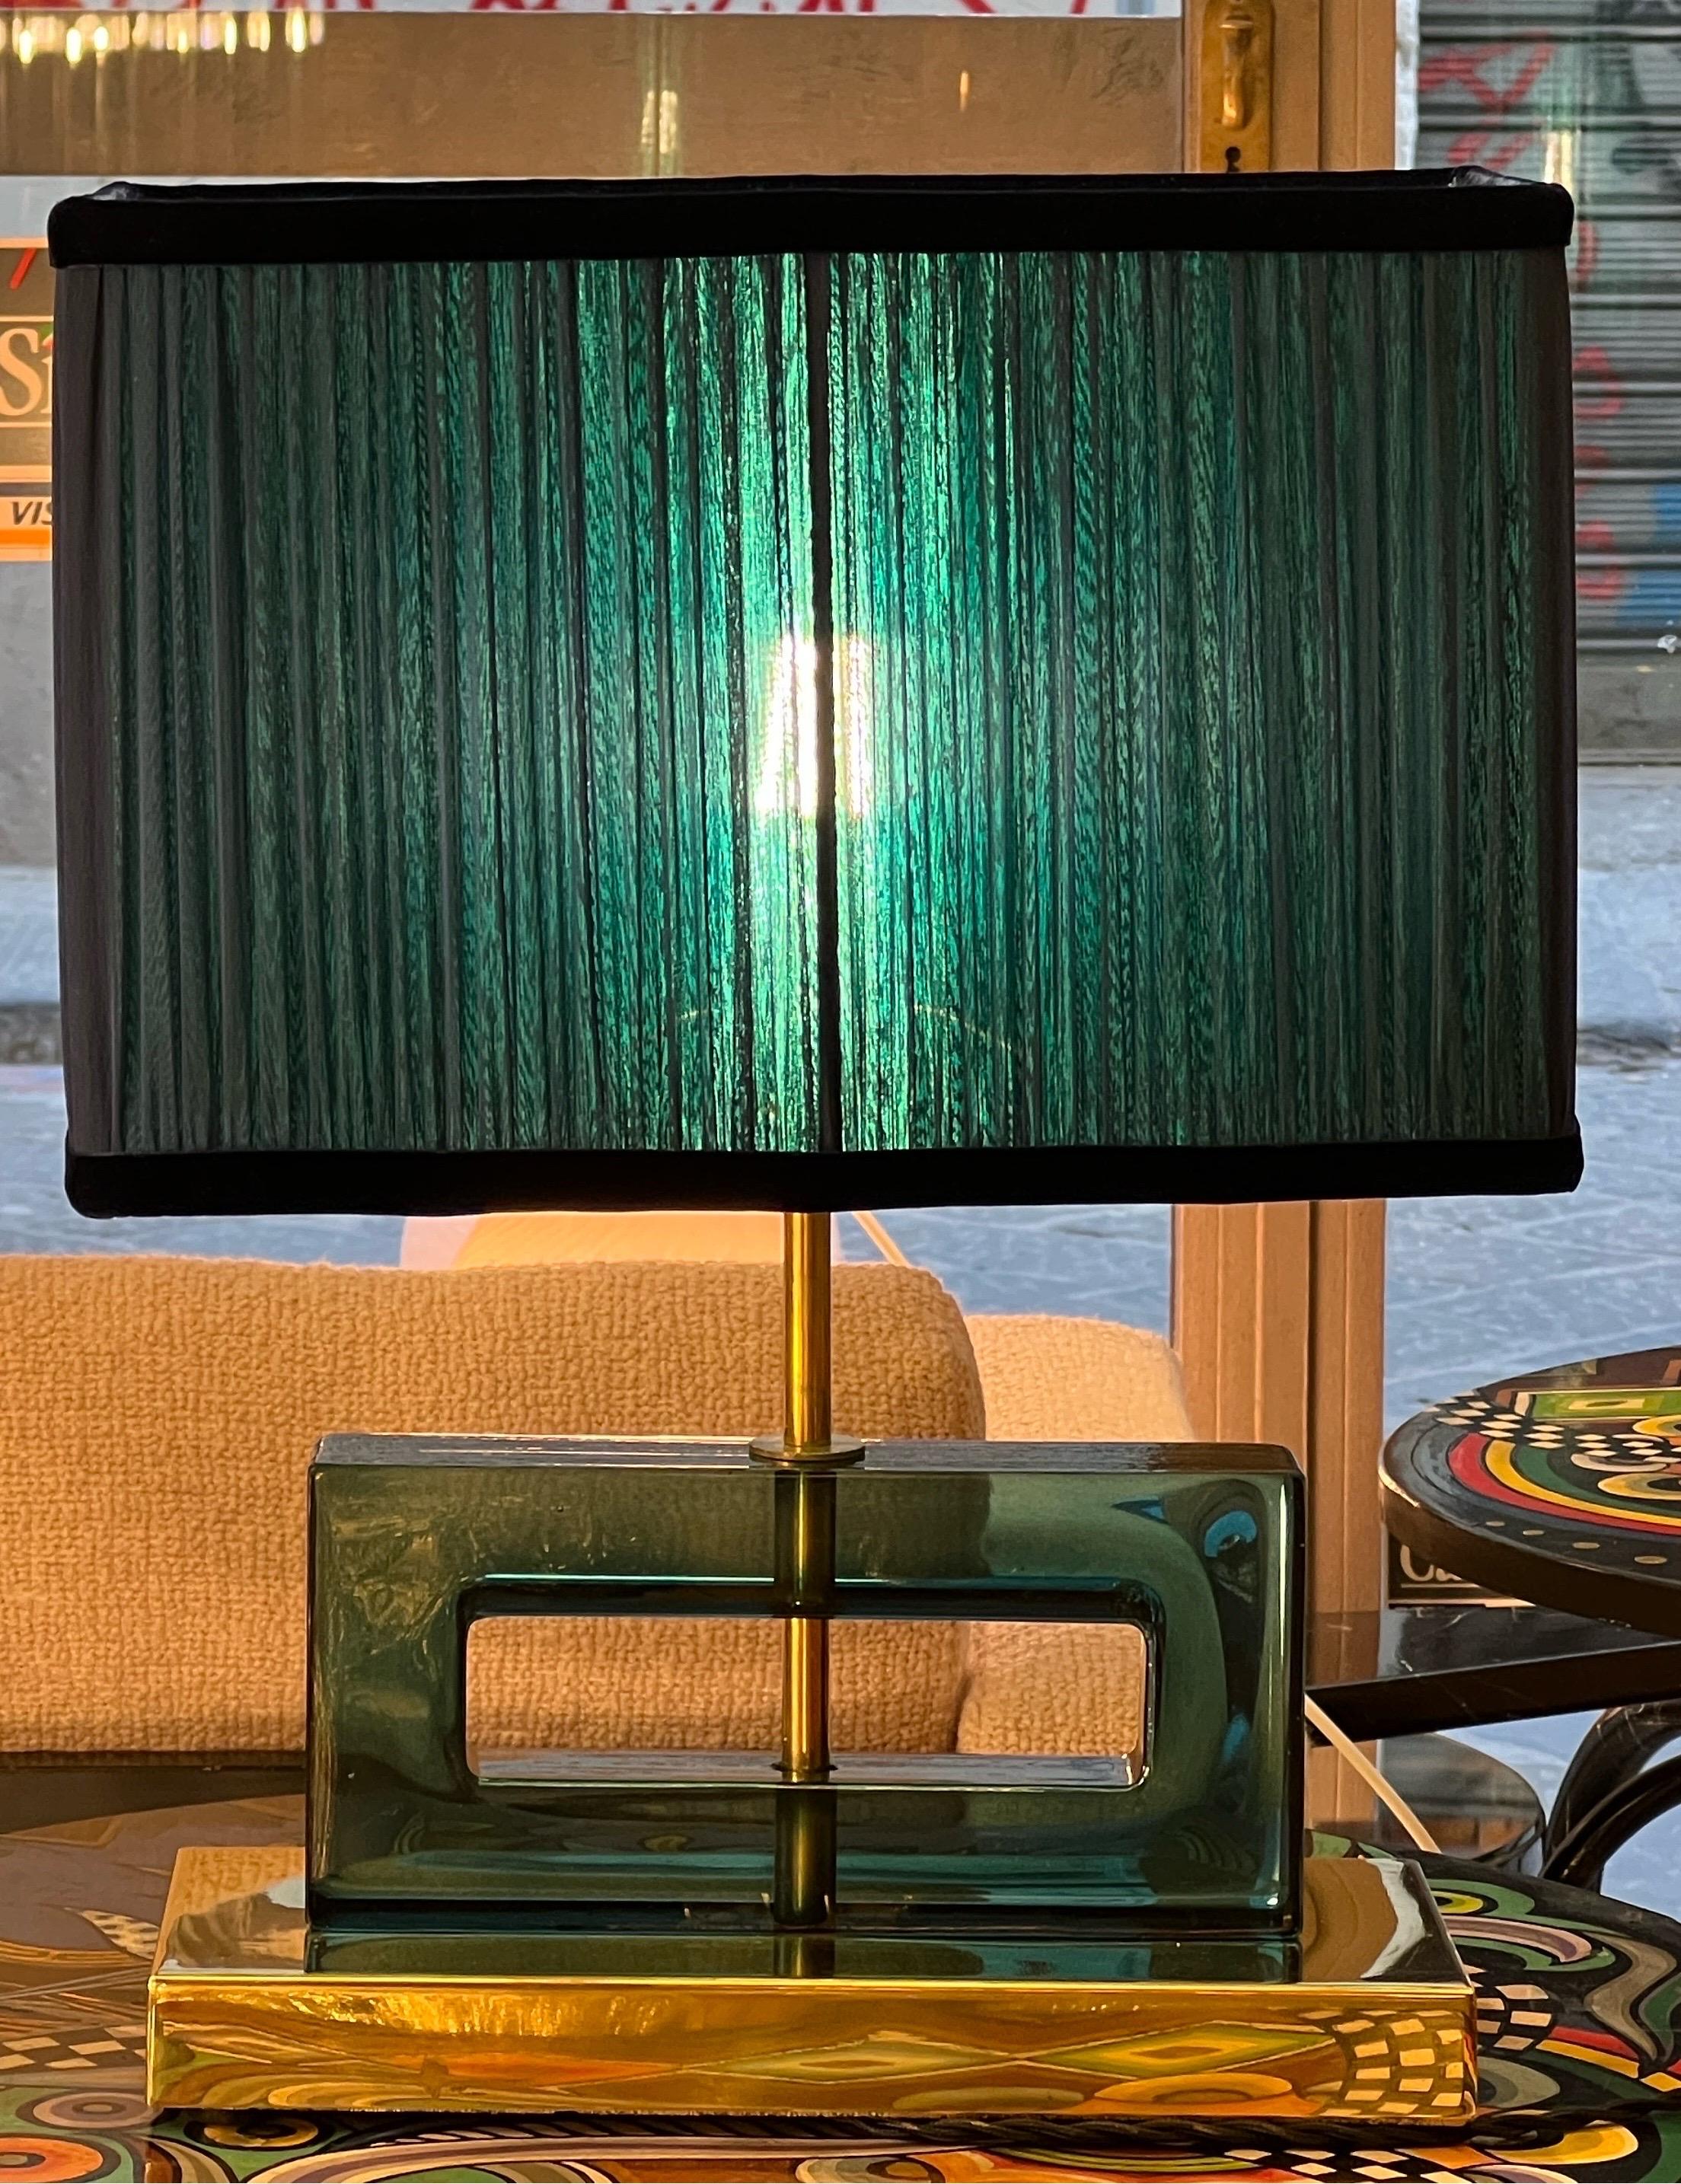 Petrol green Murano glass blocks lamps with brass base and our hand sewn blue and green lampshades.
The geometric glass blocks are solid, thick and heavy.
The double color lampshades are handmade in our internal laboratory using ruffled double color